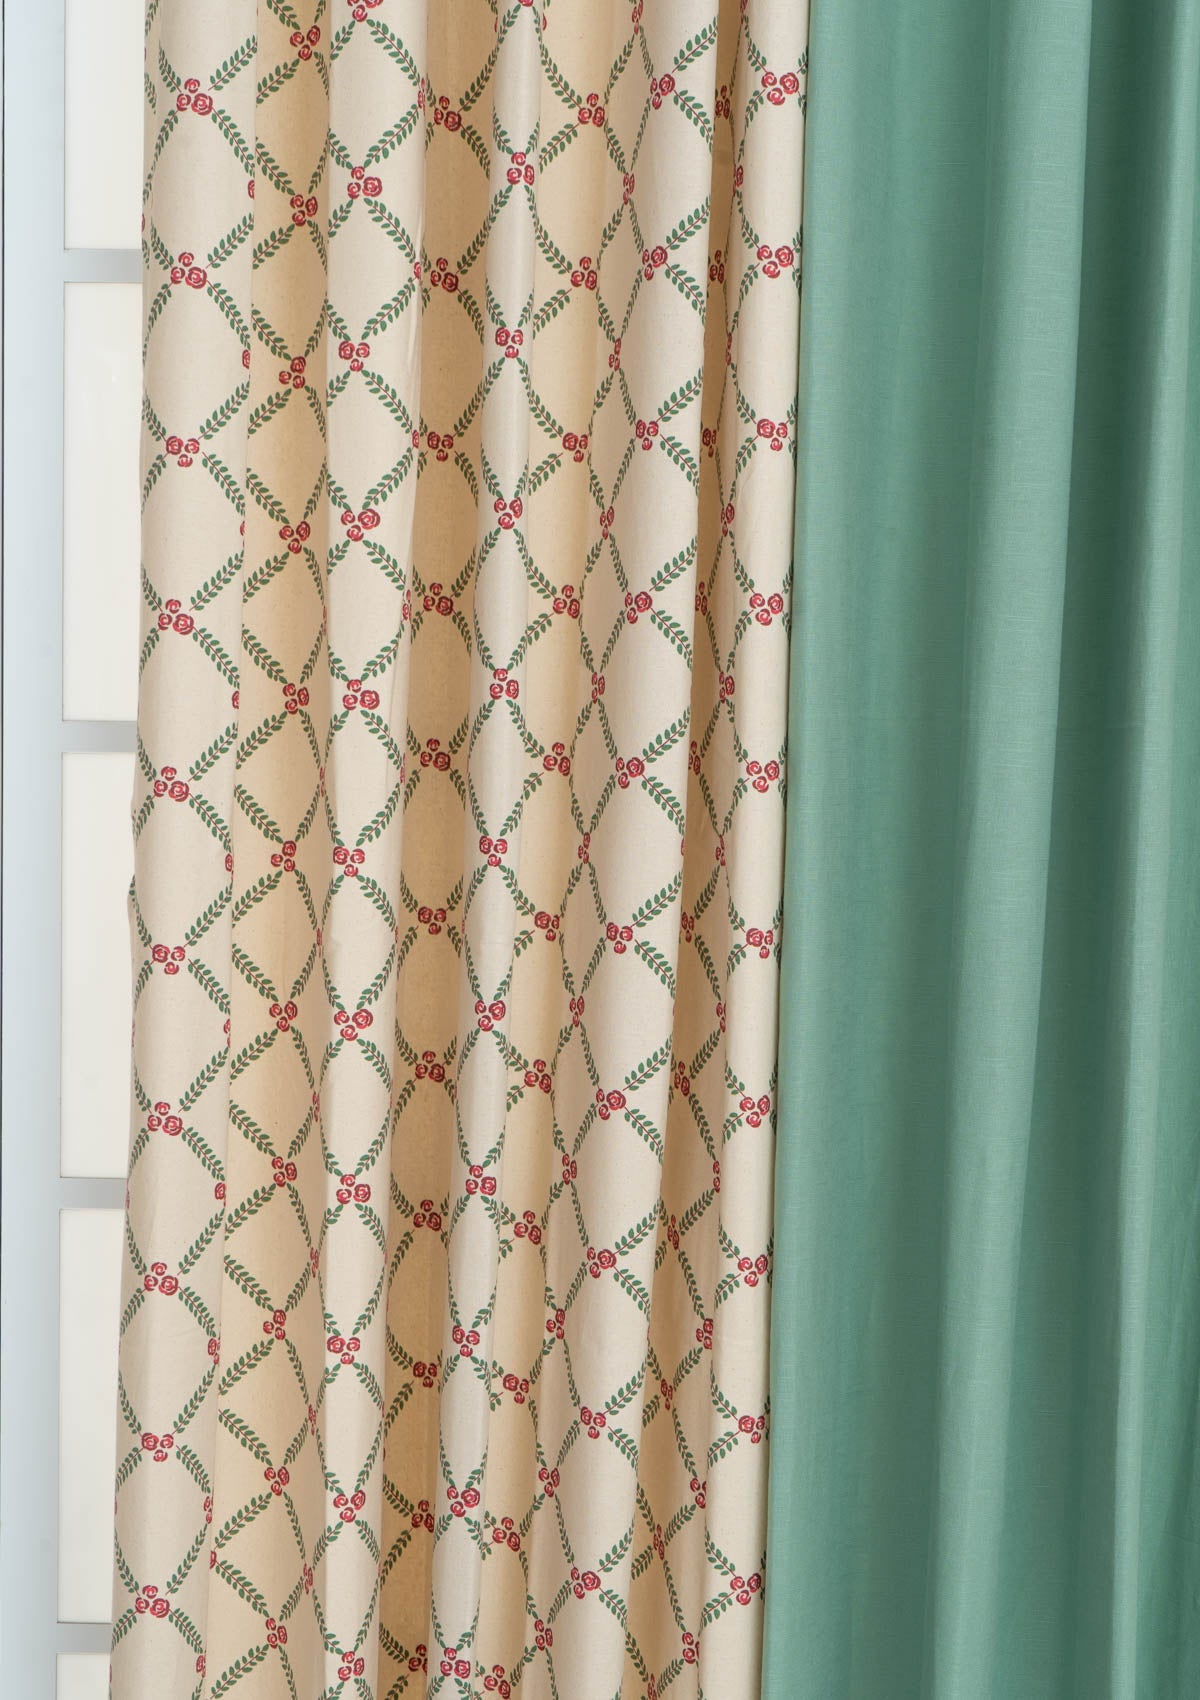 Sage Green with Climbing Roses set of 4 Cotton Curtain - Multicolor